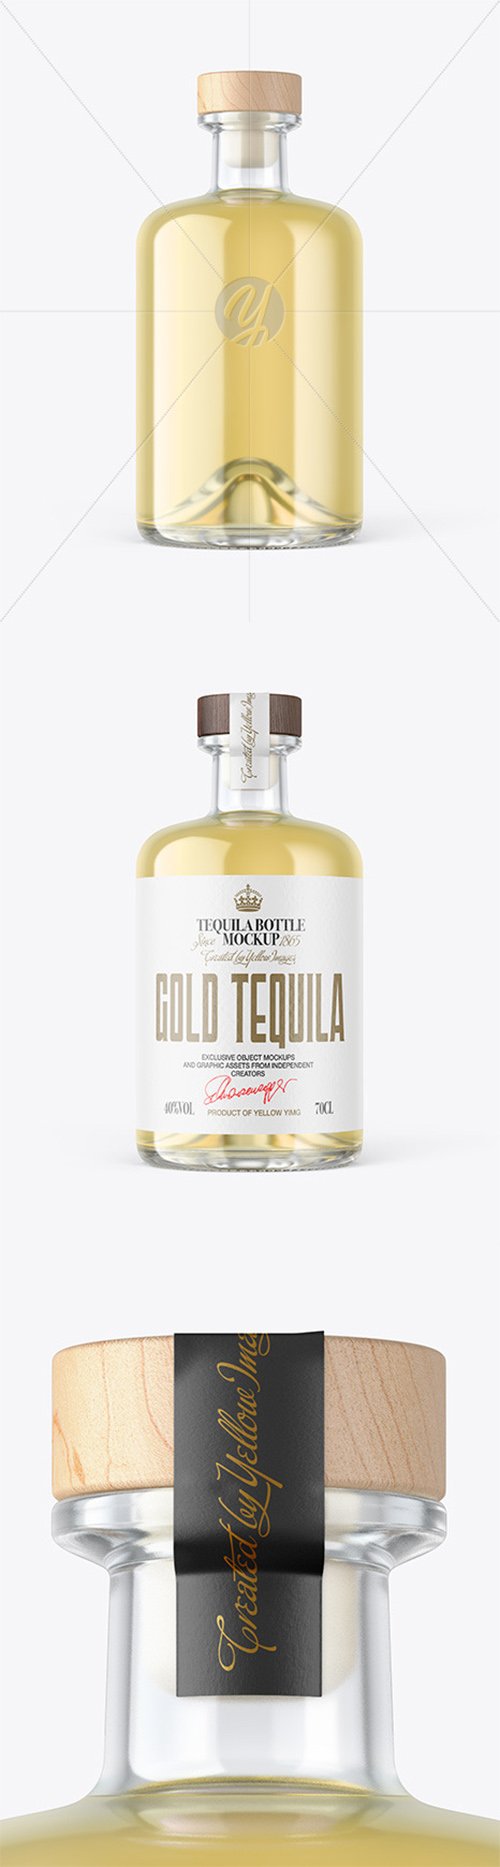 Gold Tequila Bottle with Wooden Cap Mockup 79841